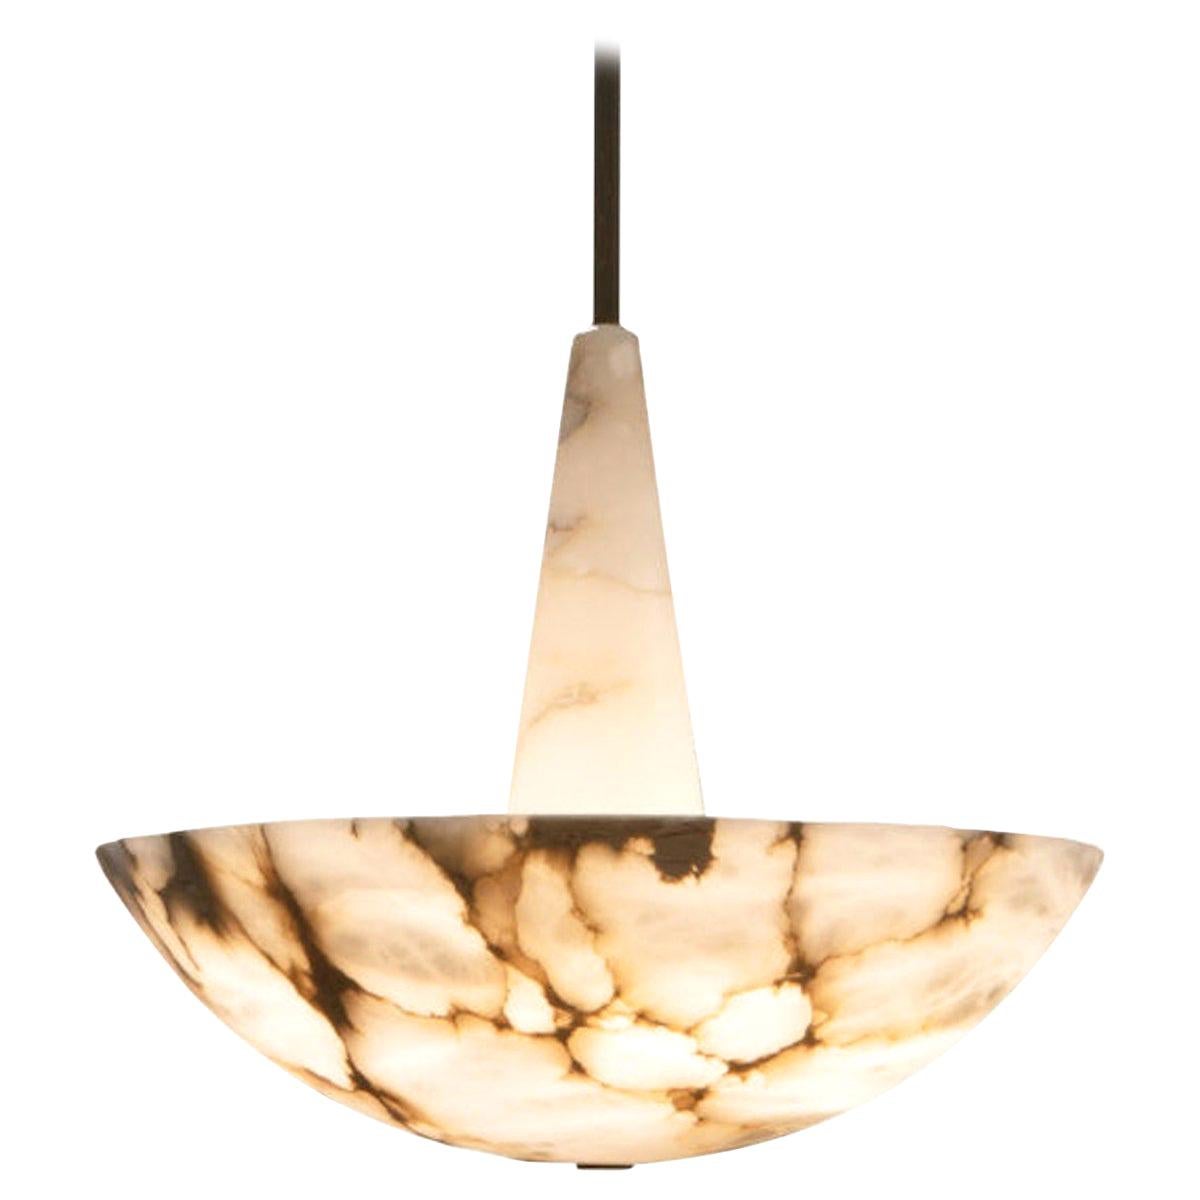 Pendant light by Garnier & Linker: Shade made out of veined Alabaster or Alabaster combined with dark natural brass patina. A 